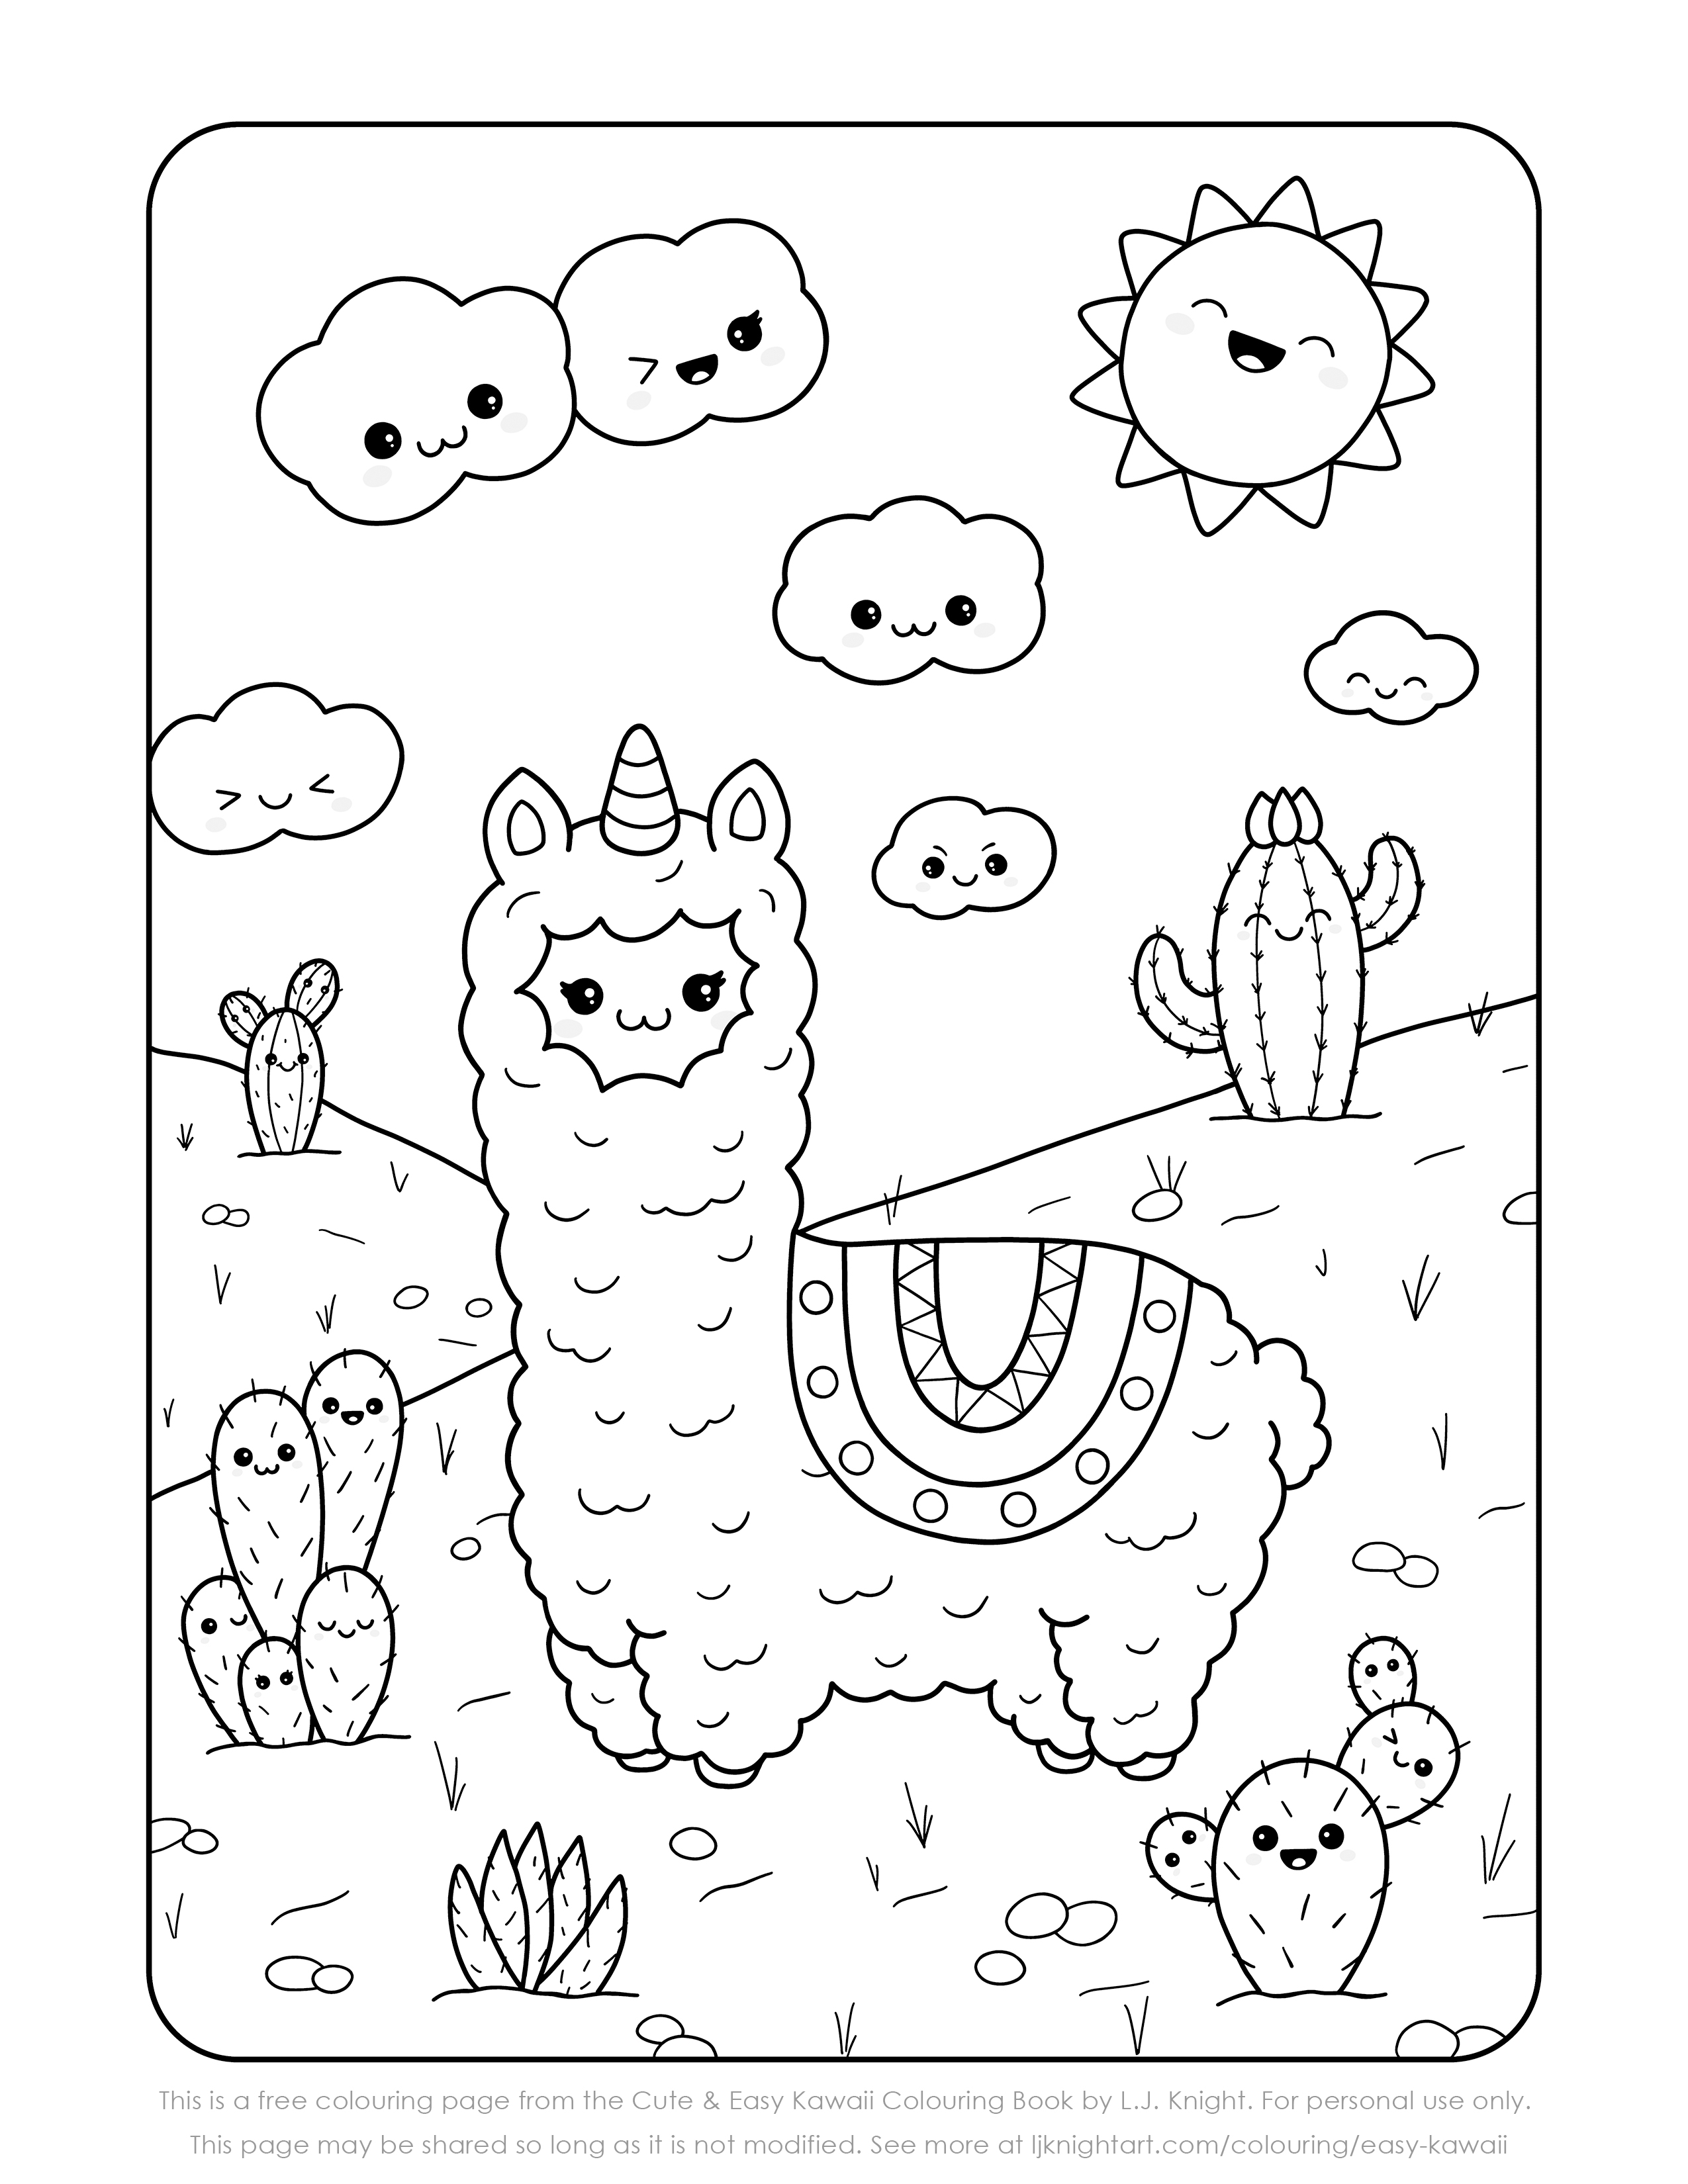 New – Cute and Easy Kawaii Colouring Book Is Now Available! | L.J. Knight